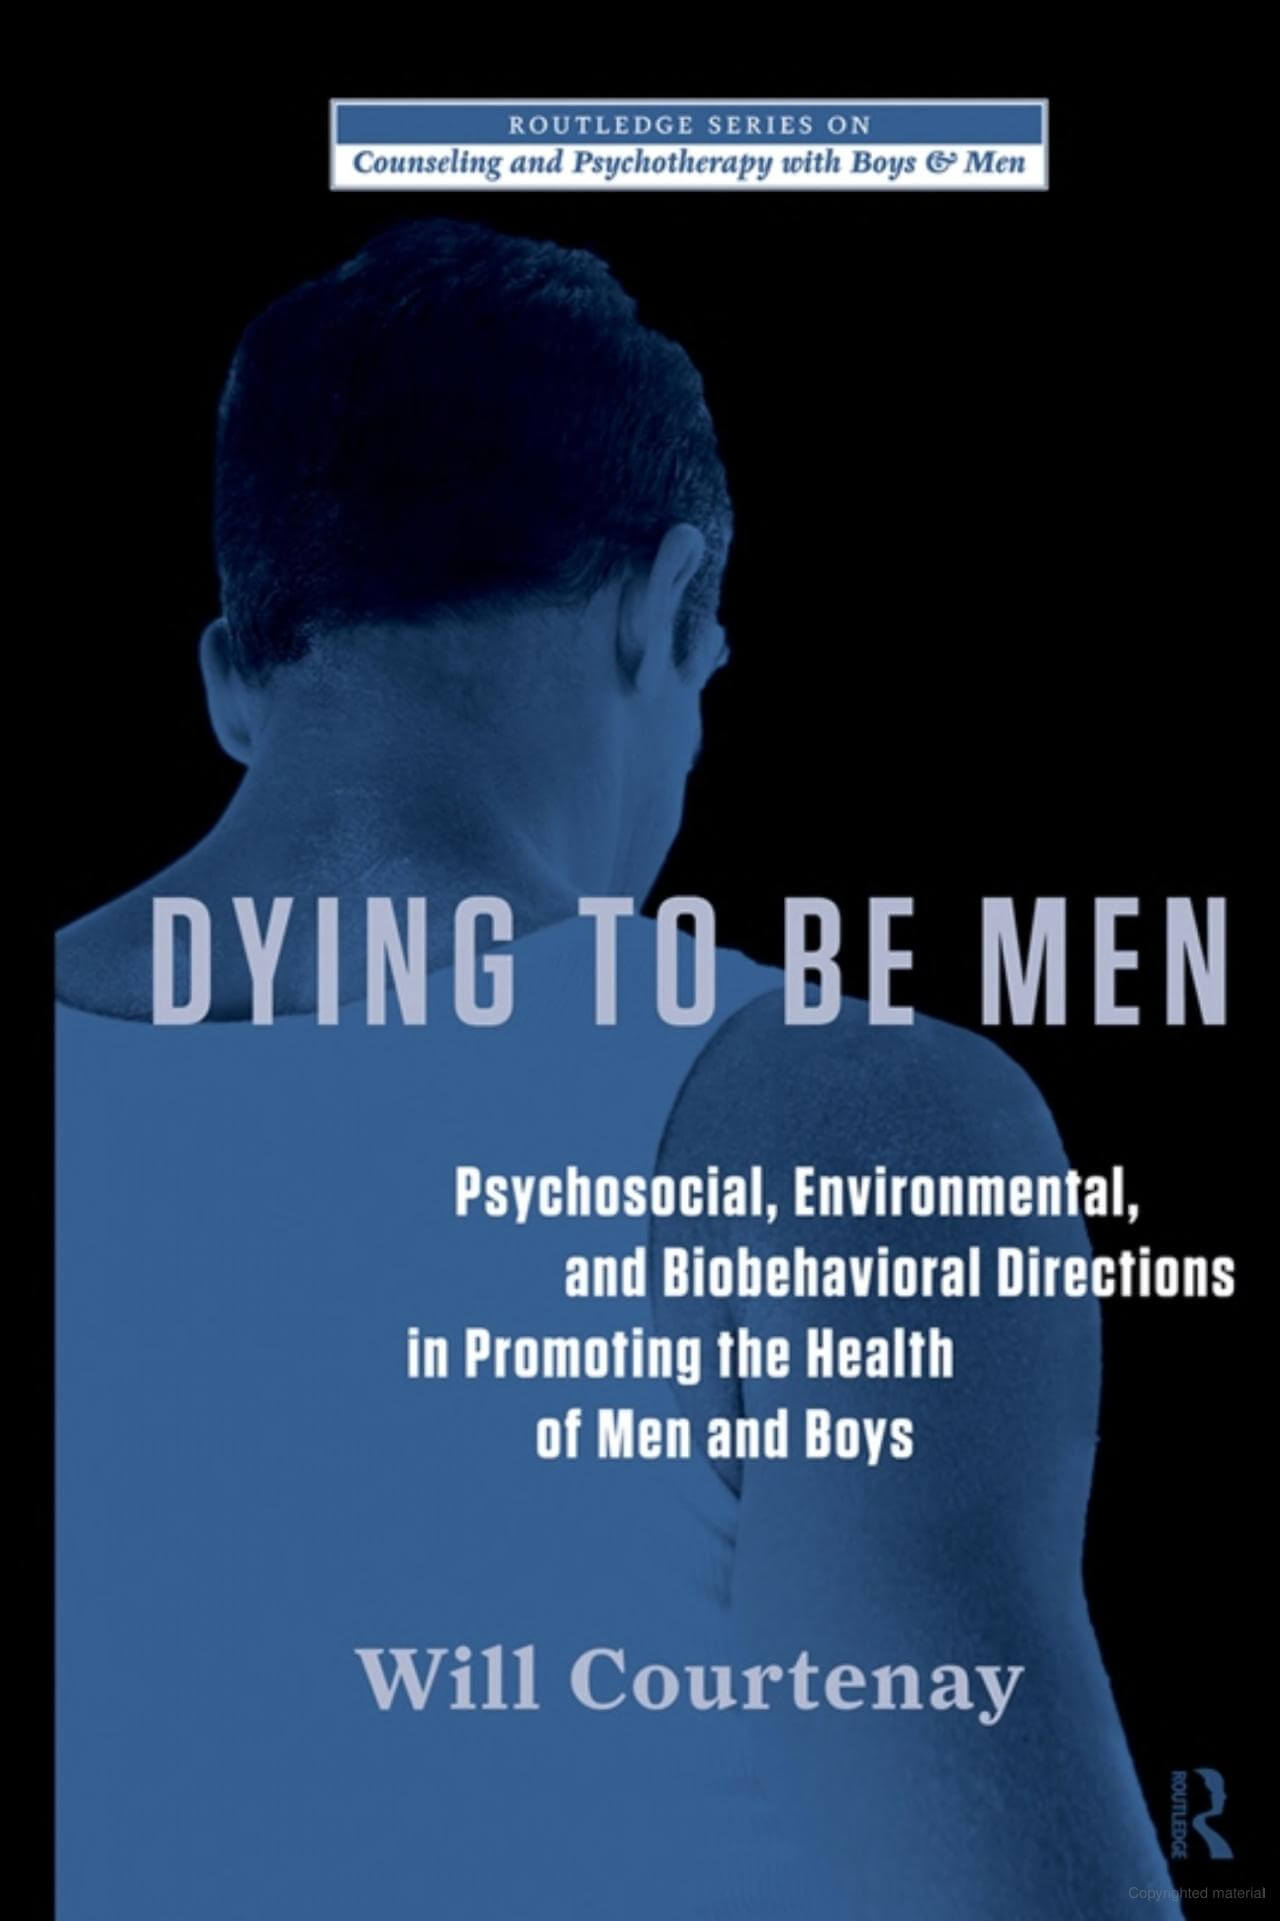 Dying to be men: Psychosocial, environmental, and Biobehavioral Directions in promoting the health of men and boys